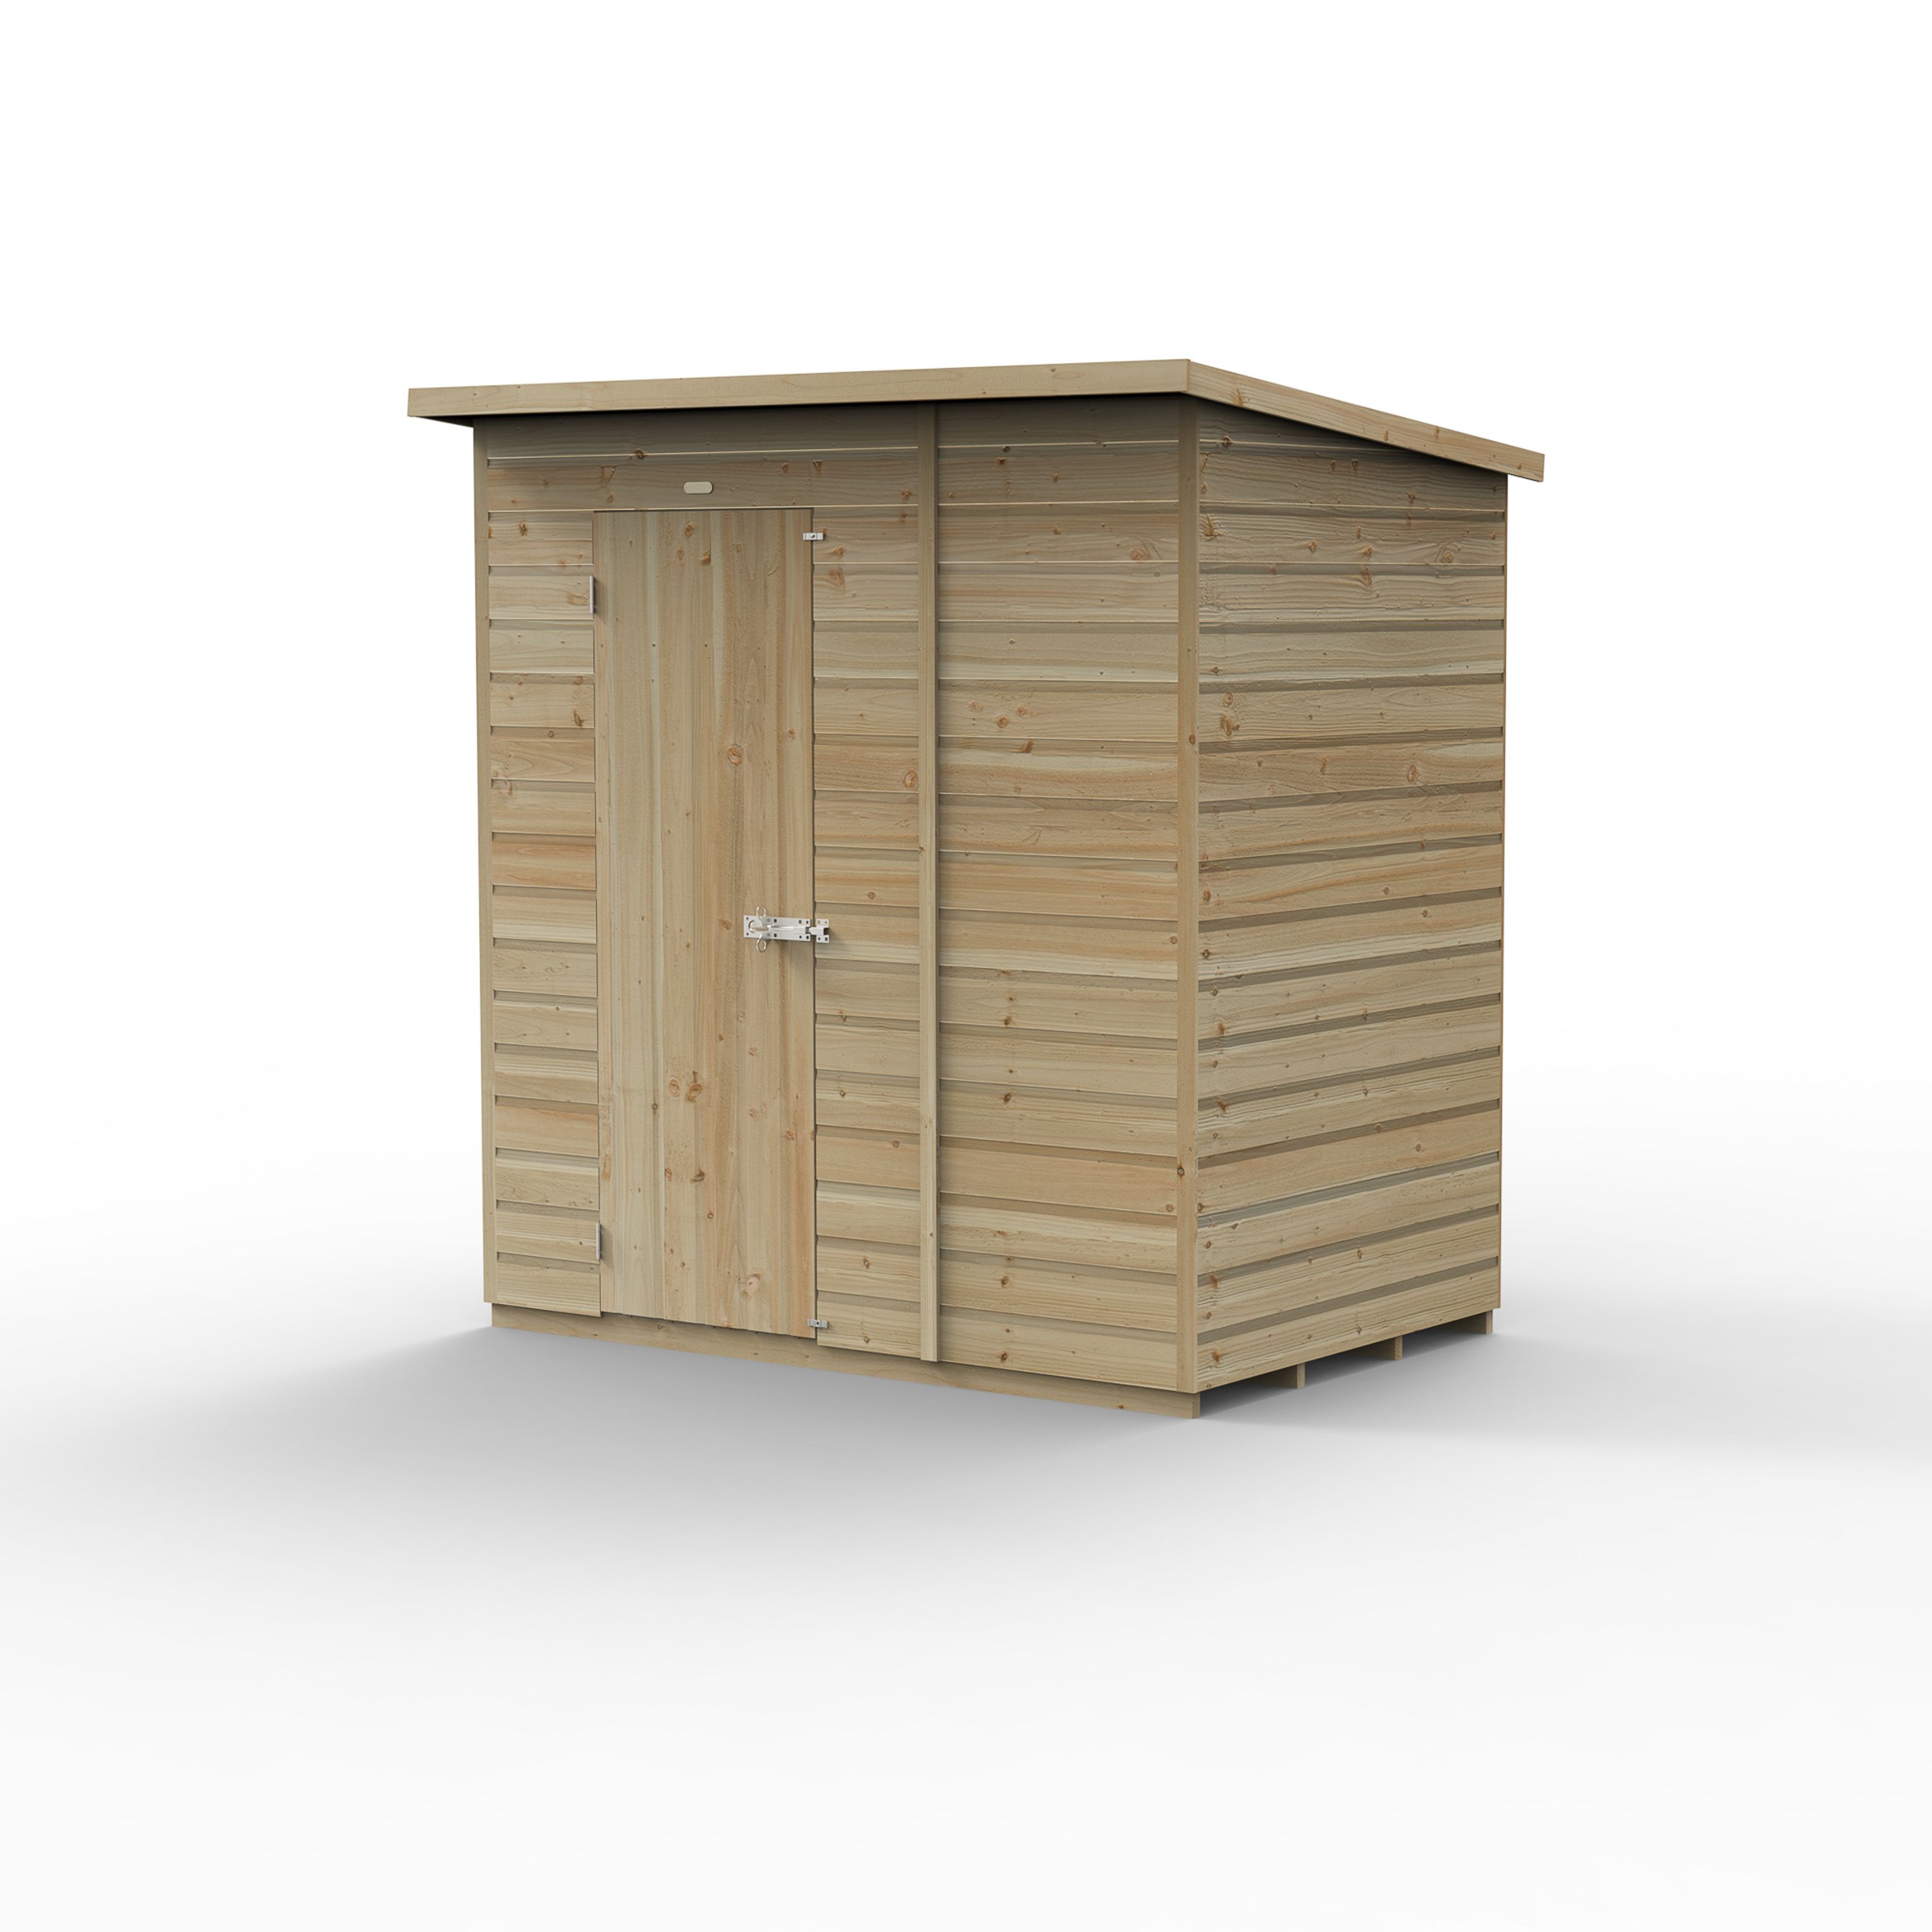 Forest Garden Beckwood 6x4 ft Pent Natural timber Wooden Shed with floor (Base included)